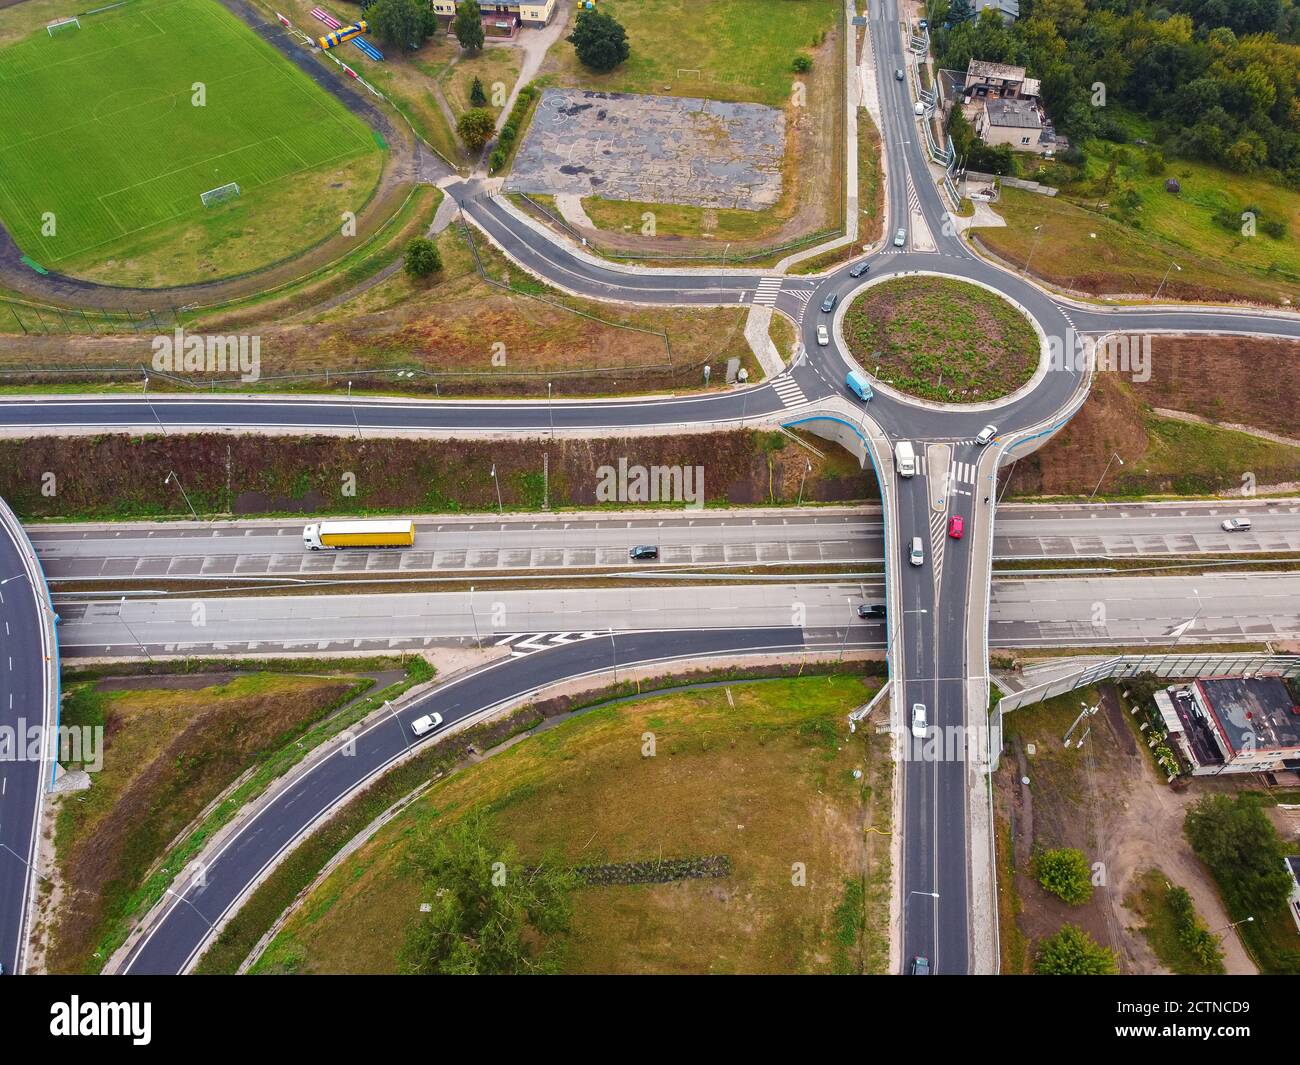 Road junction with roundabouts. Highway. Drone, aerial view. Stock Photo